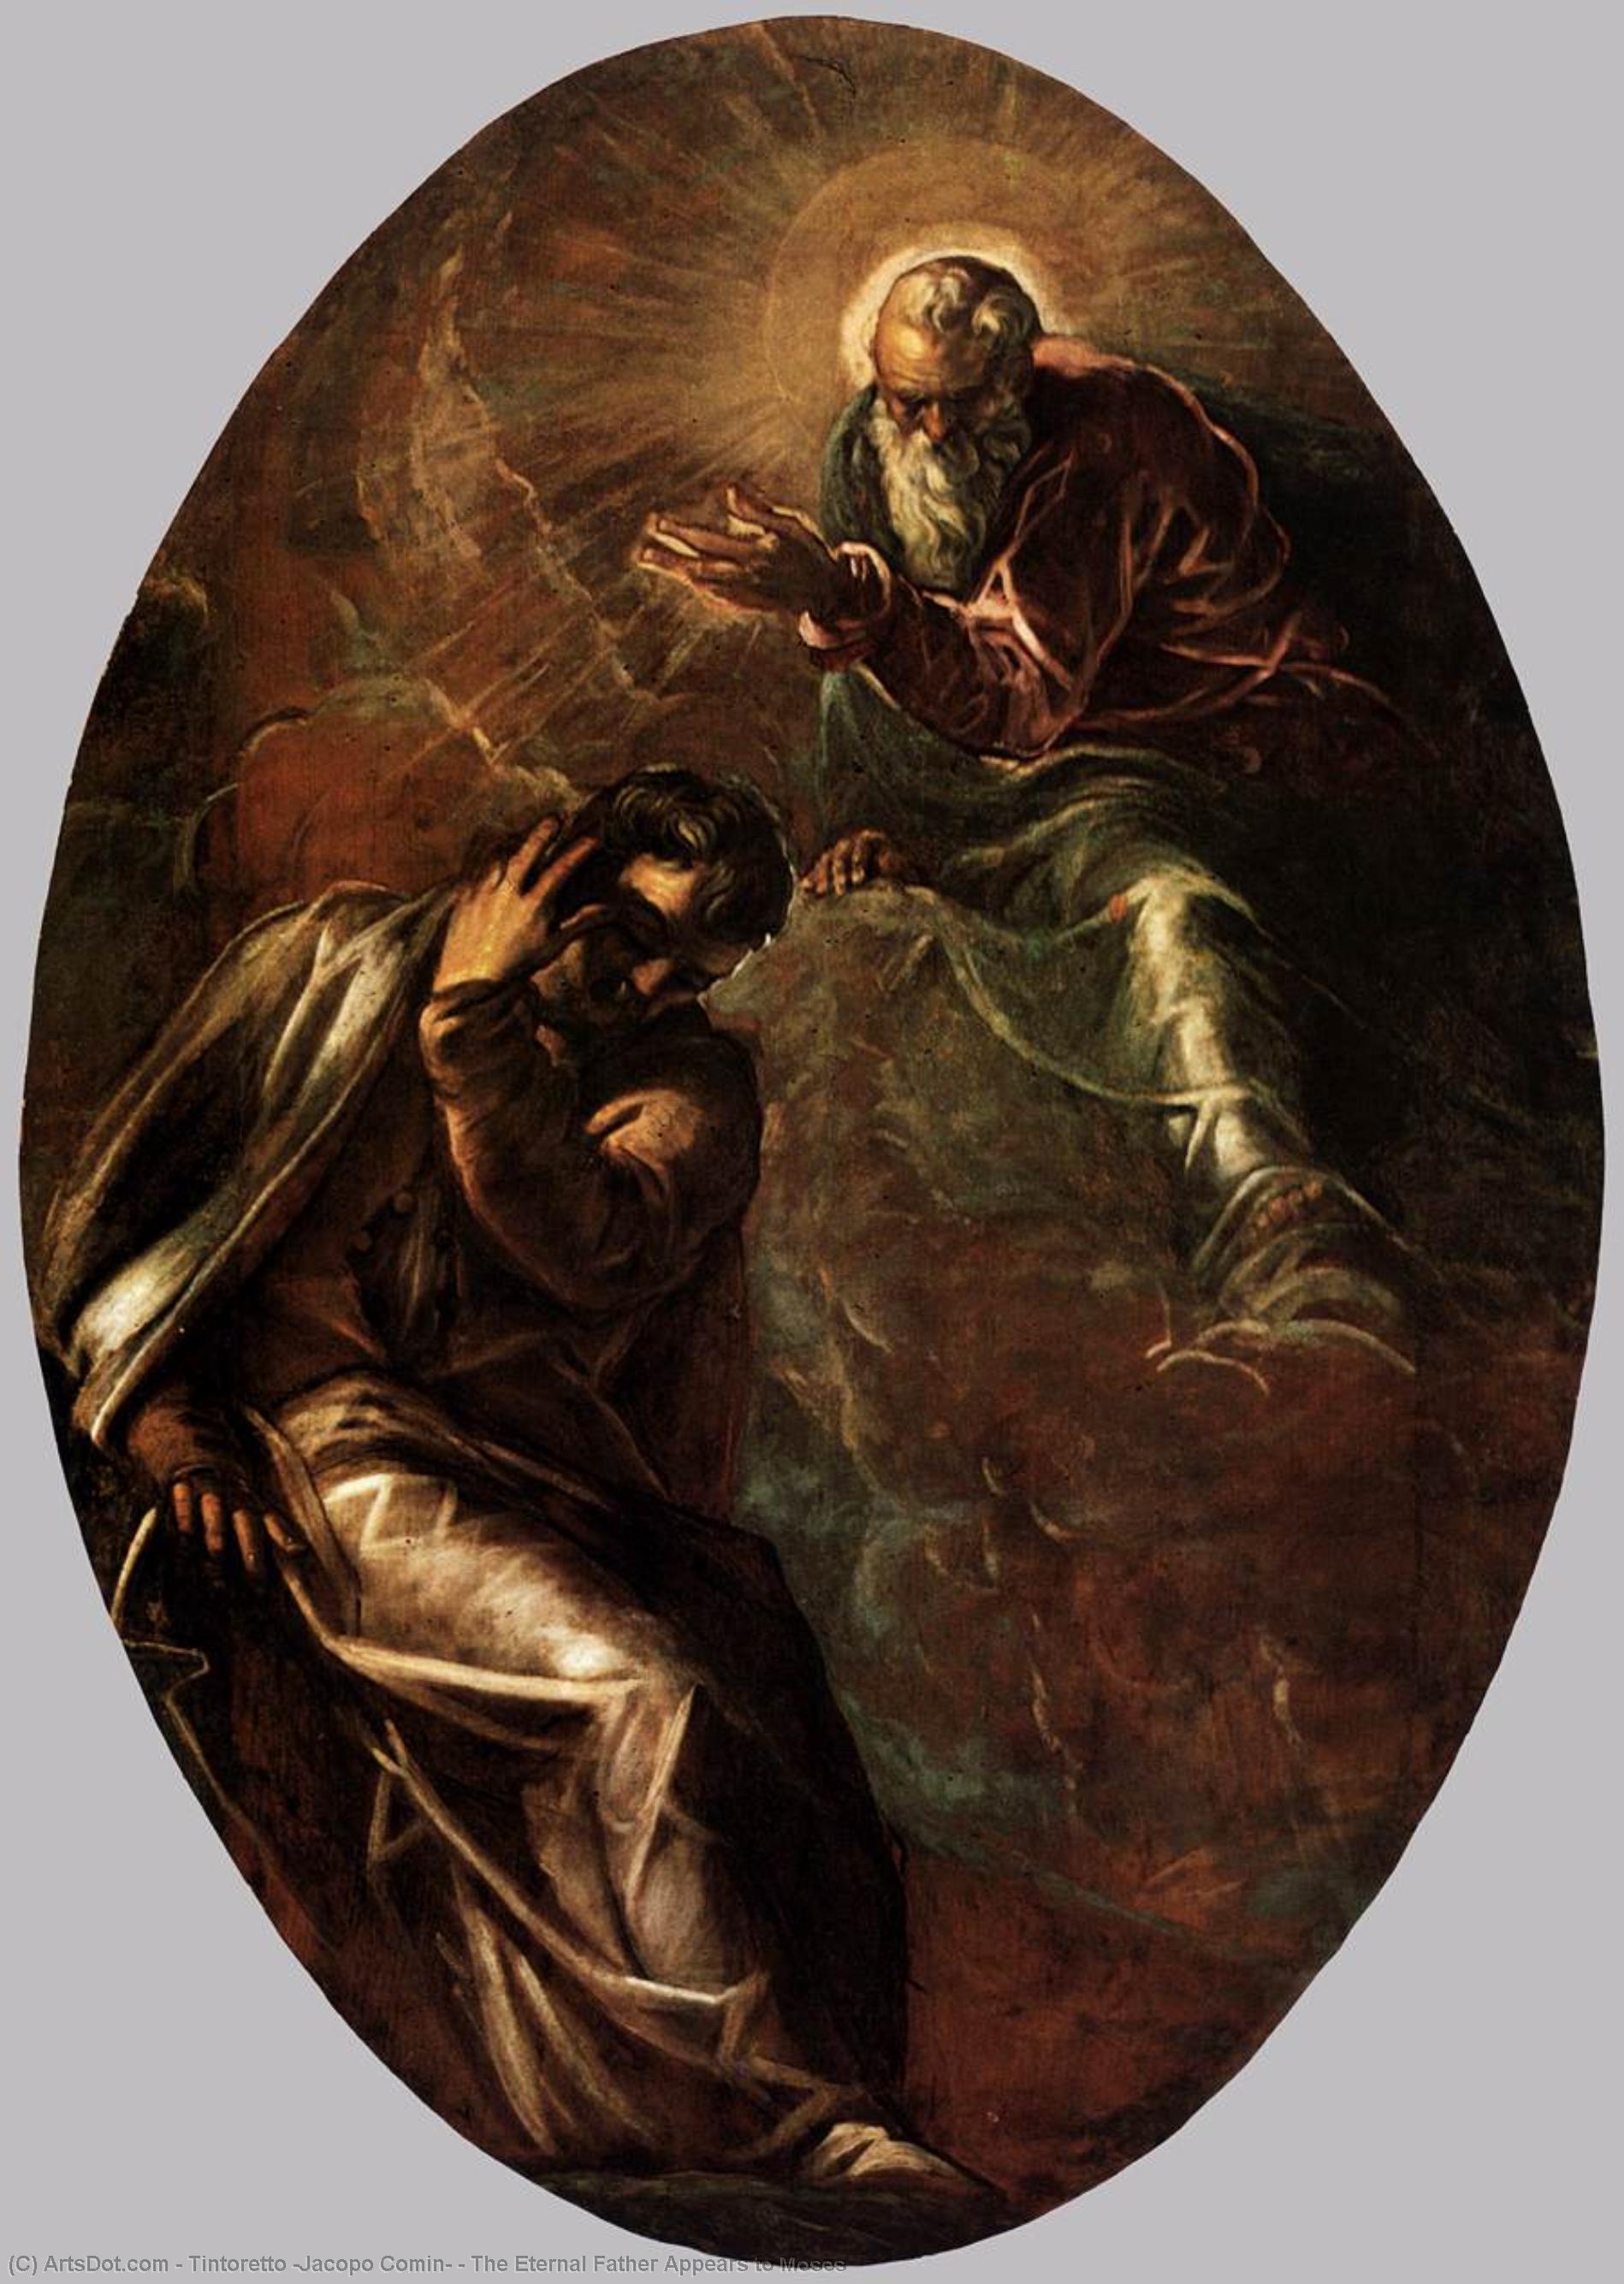 WikiOO.org - Encyclopedia of Fine Arts - Festés, Grafika Tintoretto (Jacopo Comin) - The Eternal Father Appears to Moses